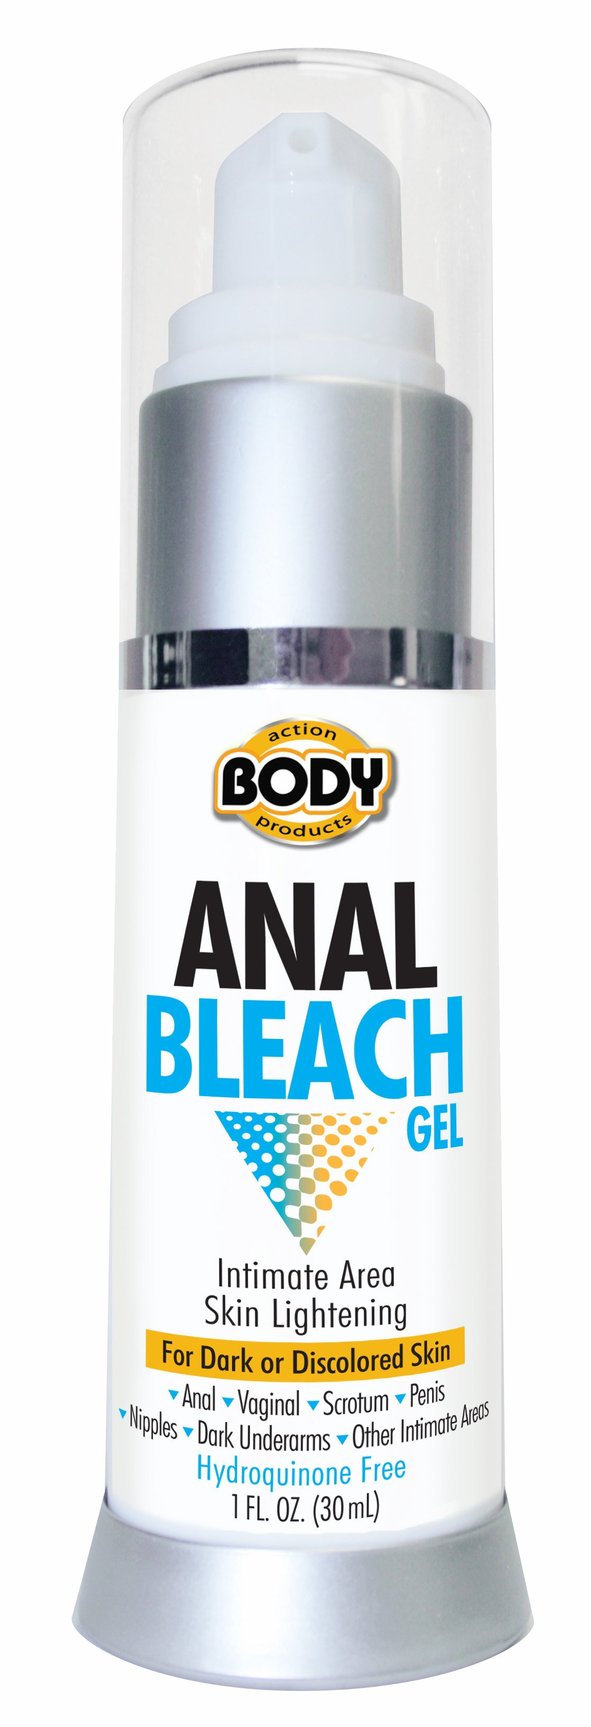 BODY ACTION ANAL BLEACH GEL 1 OZ BOTTLE - Click Image to Close